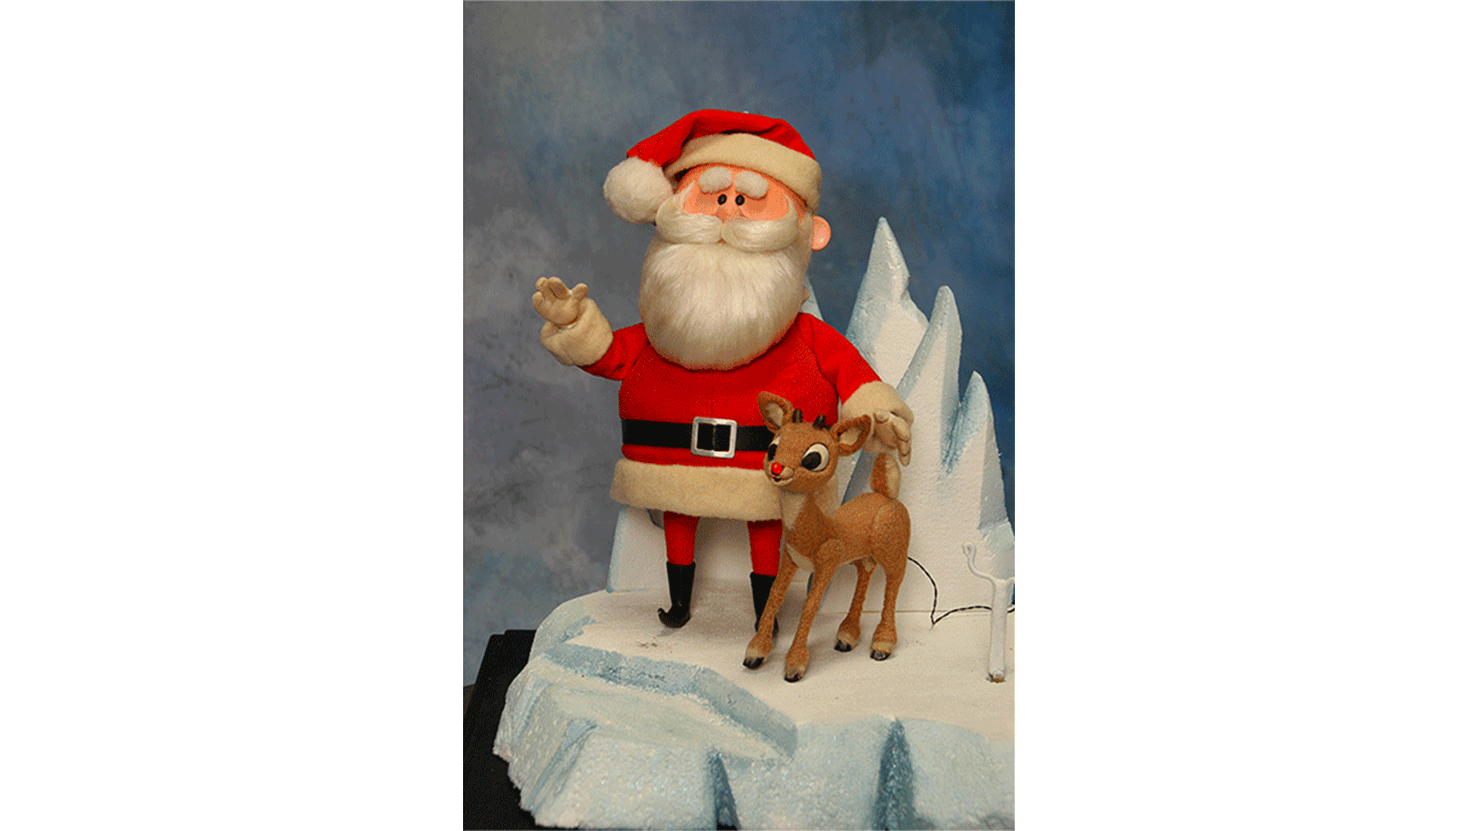 Santa and Rudolph from the "Rudolph the Red-Nosed Reindeer" TV special